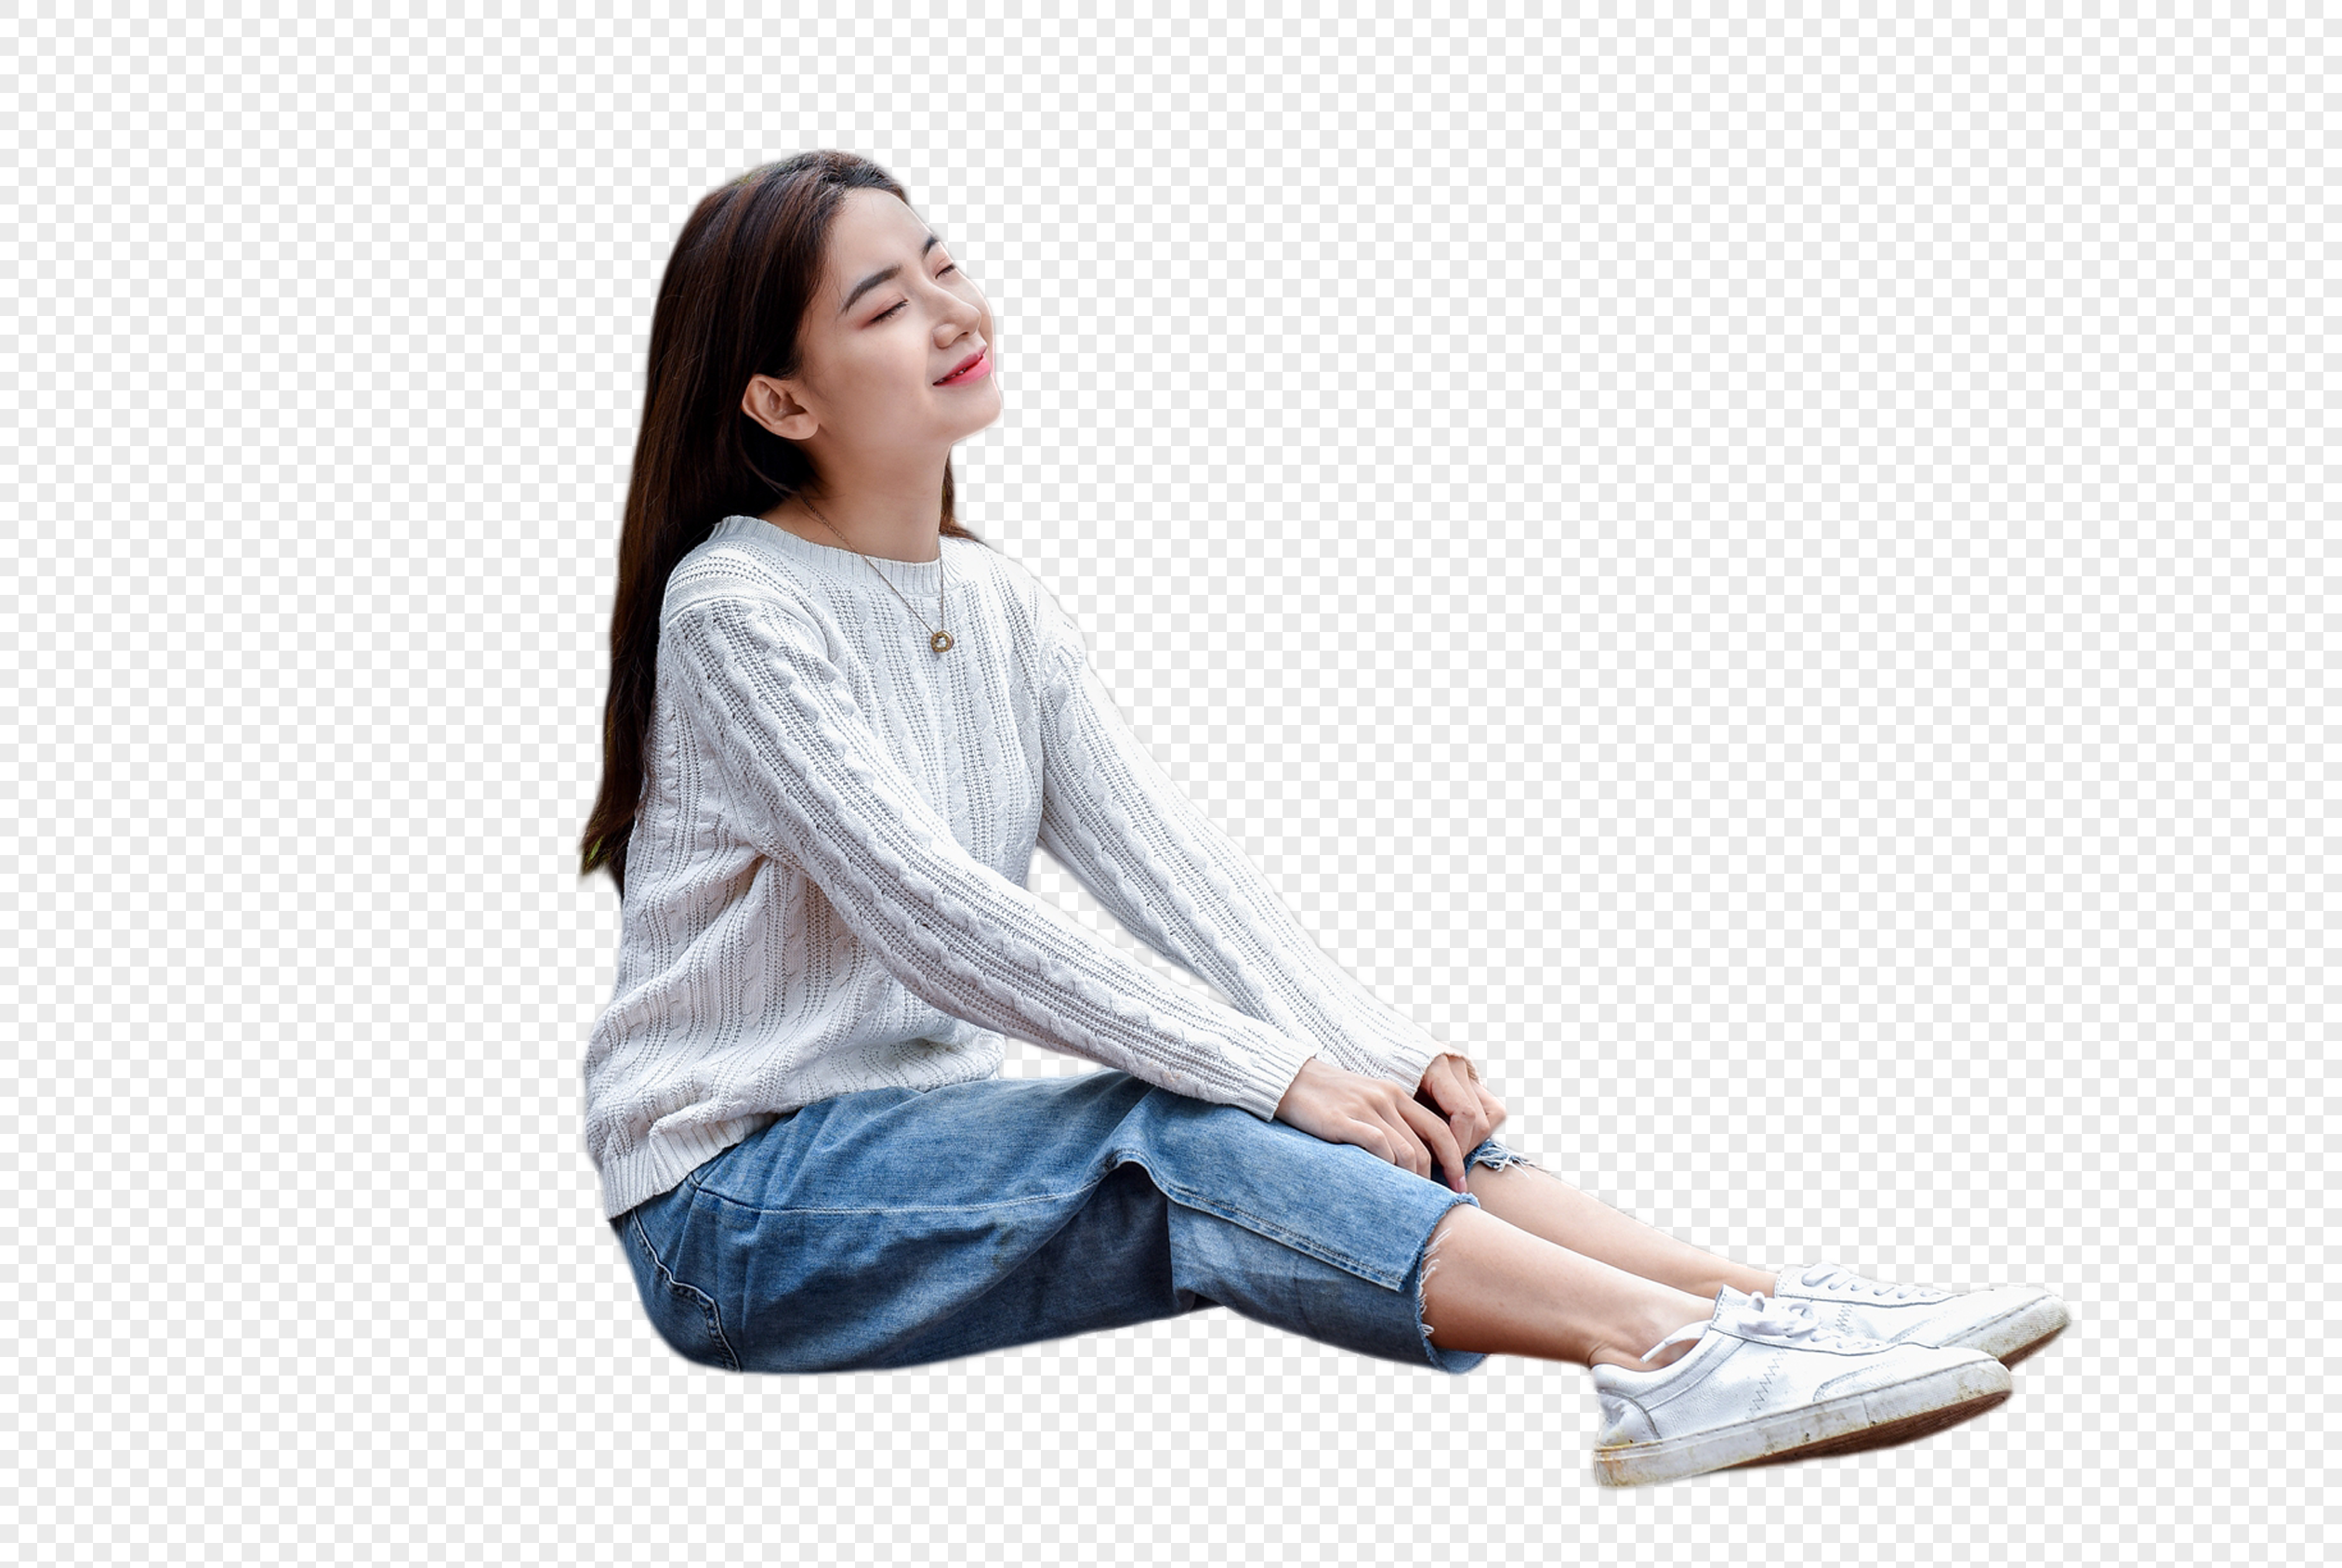 Female Classmate Sitting On The Floor PNG Picture And Clipart Image For ...